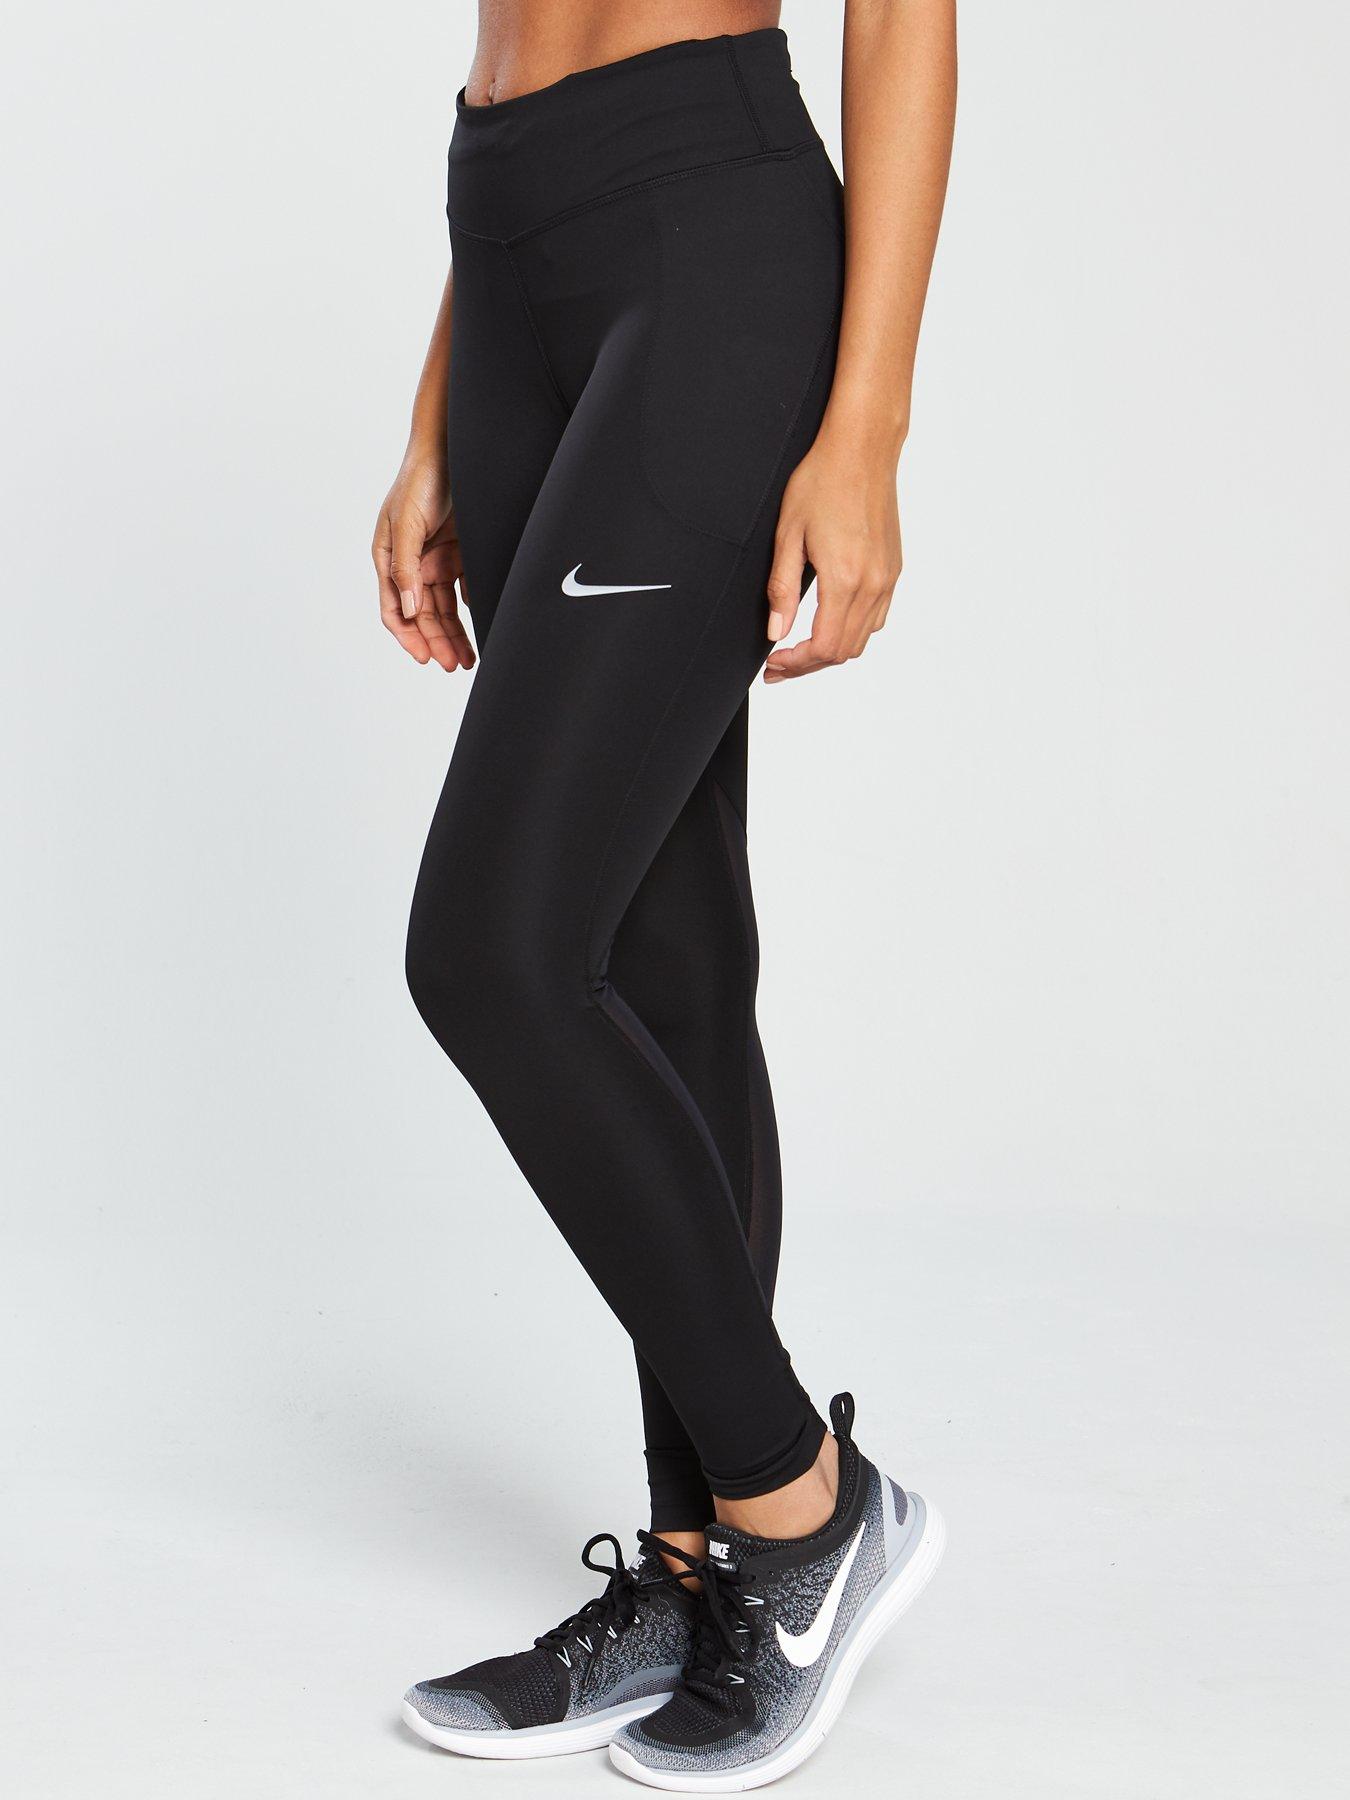 Nike leggings  Womens workout outfits, Sports wear fashion, Running tights  outfit